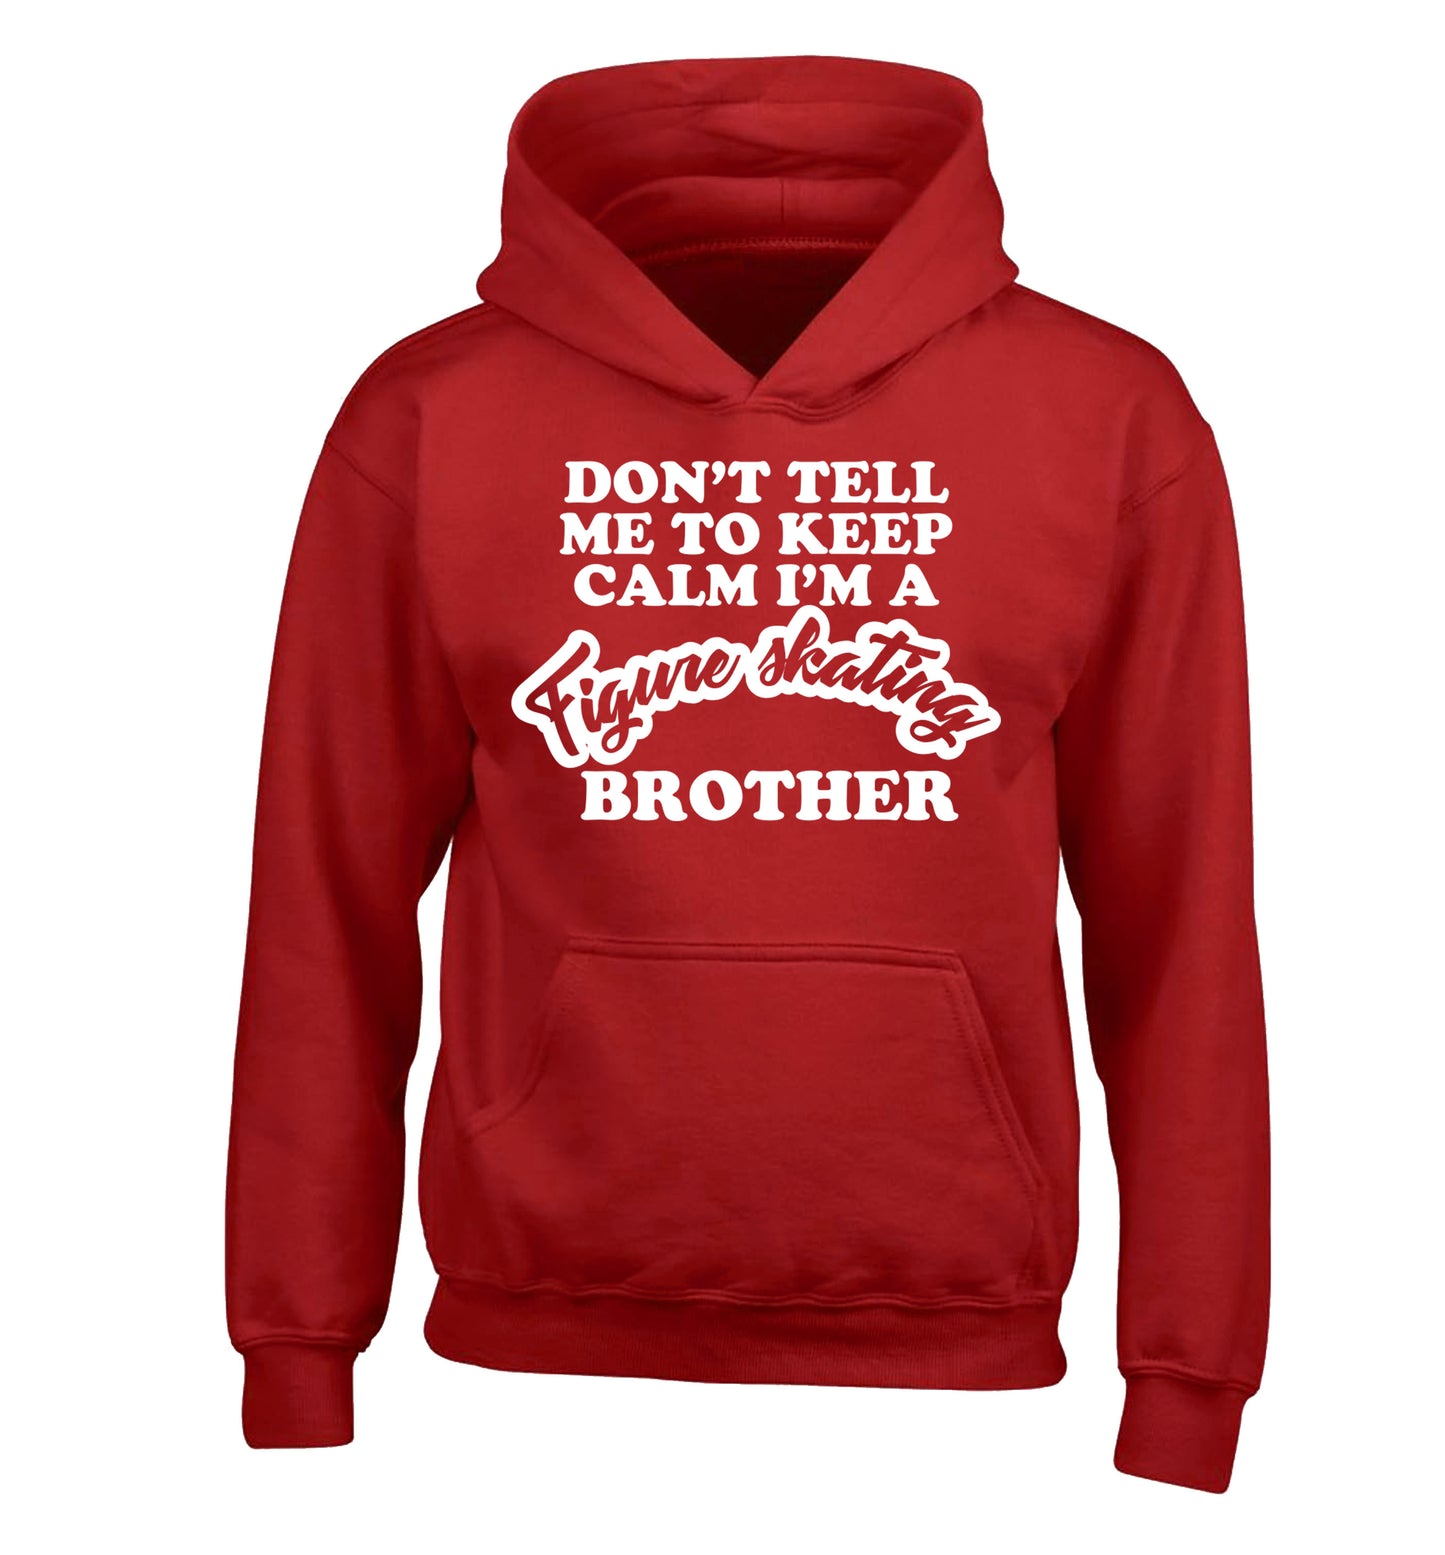 Don't tell me to keep calm I'm a figure skating brother children's red hoodie 12-14 Years